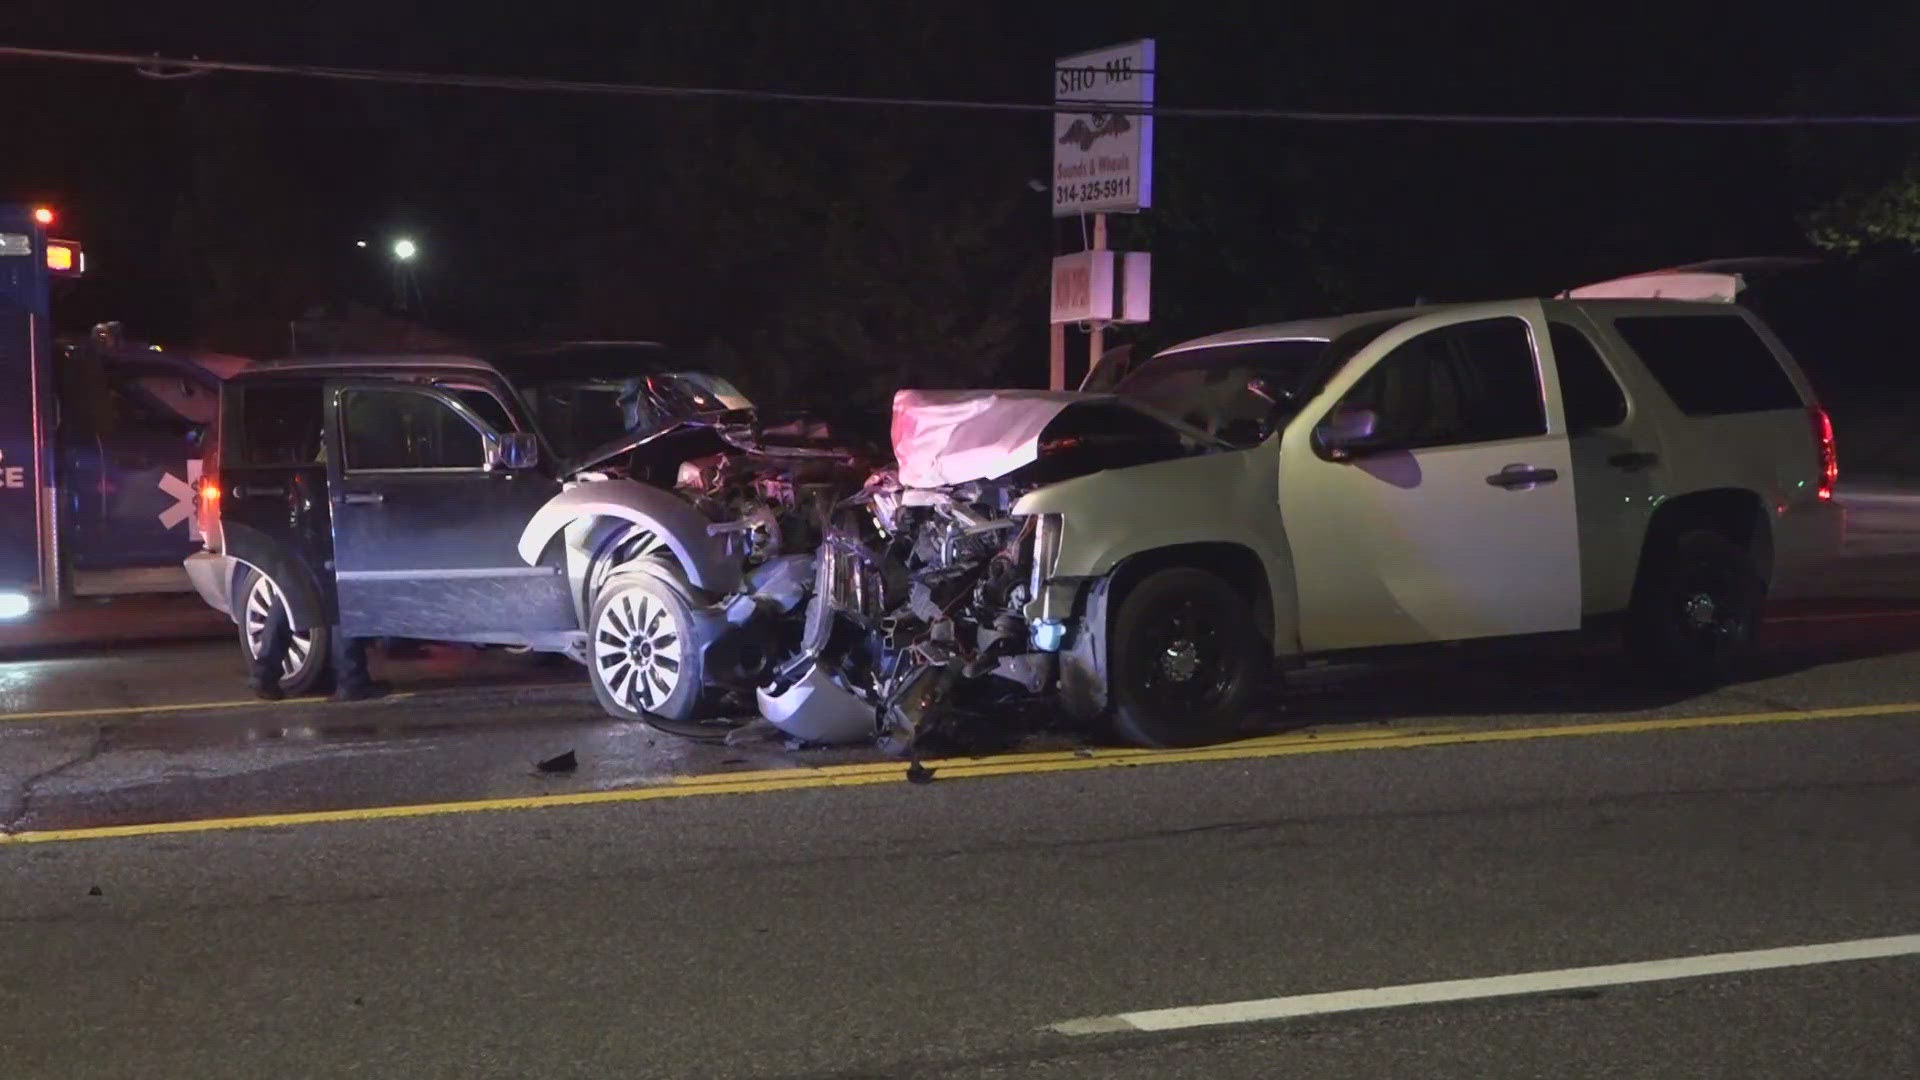 Two police officers and another driver were injured in a head-on crash. It happened at about 2 a.m. Thursday on West Florissant Avenue in Dellwood.